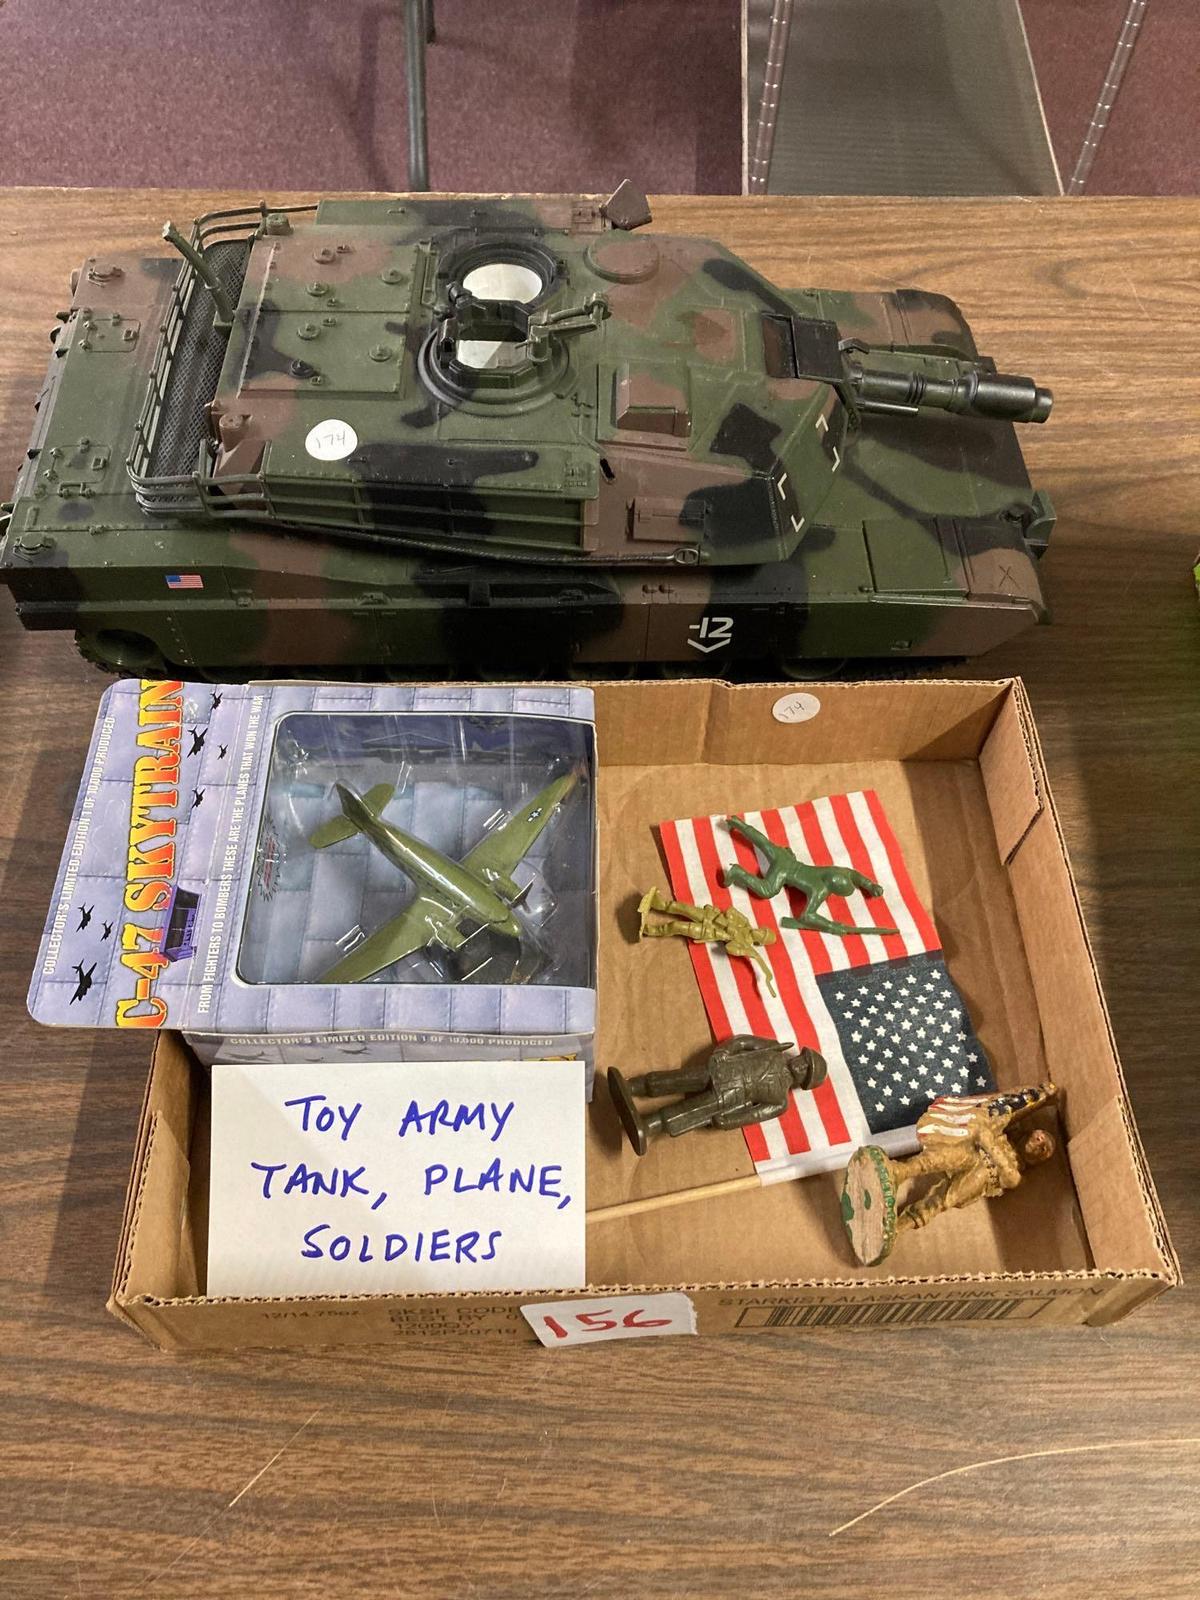 Toy army tank, plane, and soldiers